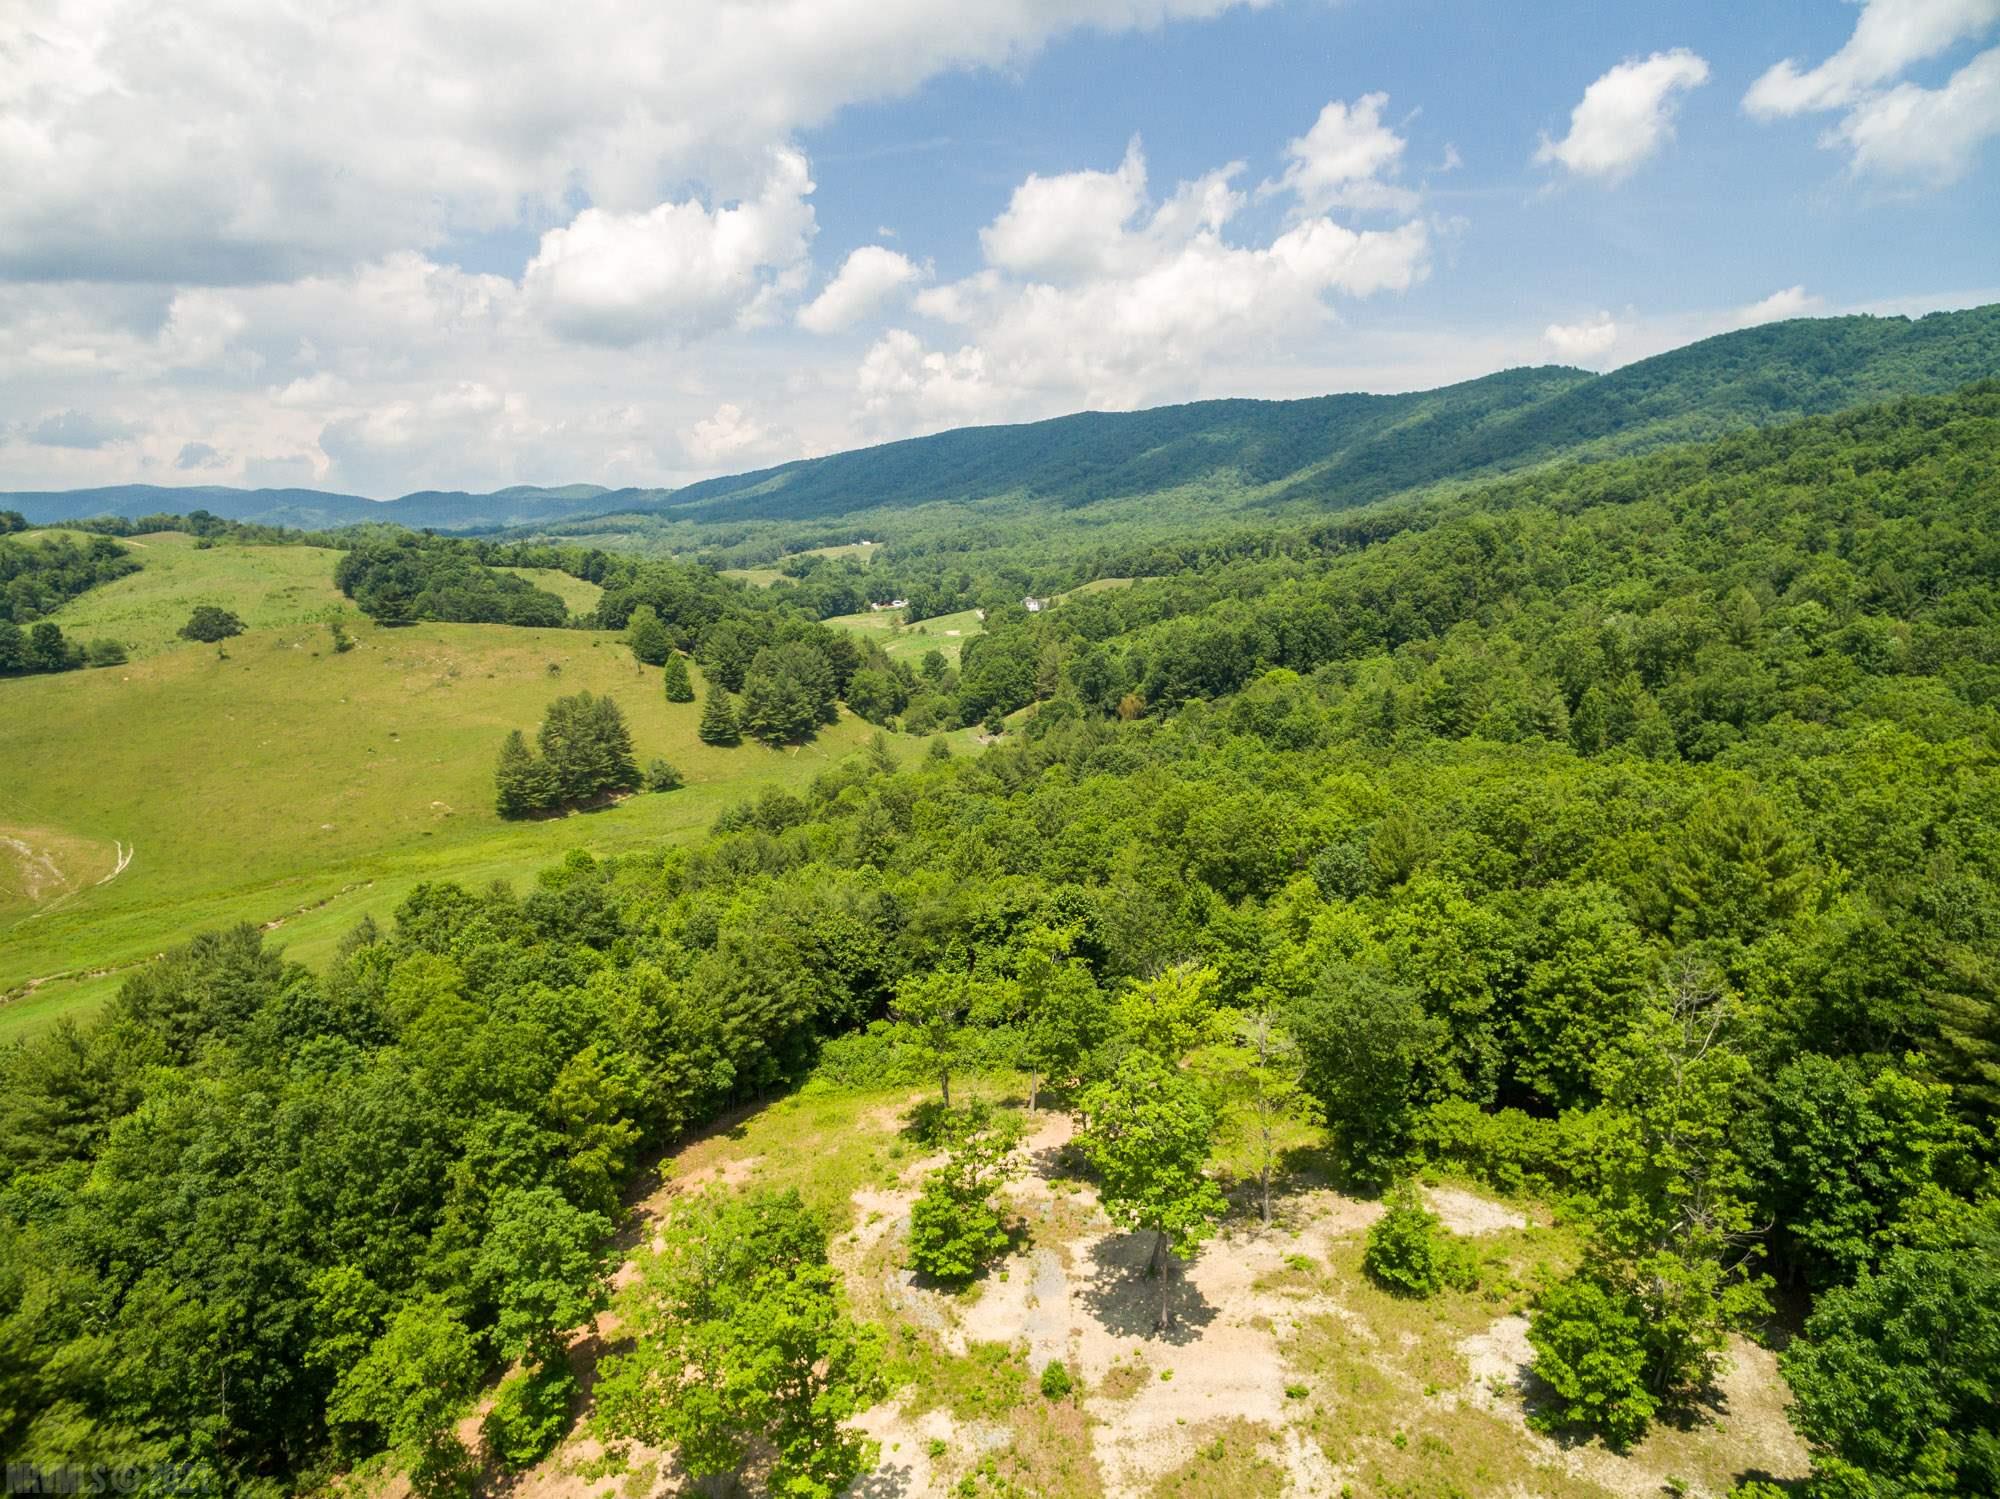 Beautiful mountain views of Elk Creek Valley located in Grayson County. This is one of two adjoining tracts. This lot has its own entrance and road leading up to a buildable home site with an outstanding view. This property offers plenty of seclusion and acreage, even adjoining Jefferson National Forest. Very close to hiking trails and horse camps. Lot 5 has been perked for a 3 bedroom septic system. Lot 4 & 5 can be sold individually or together. Call for an appointment today!